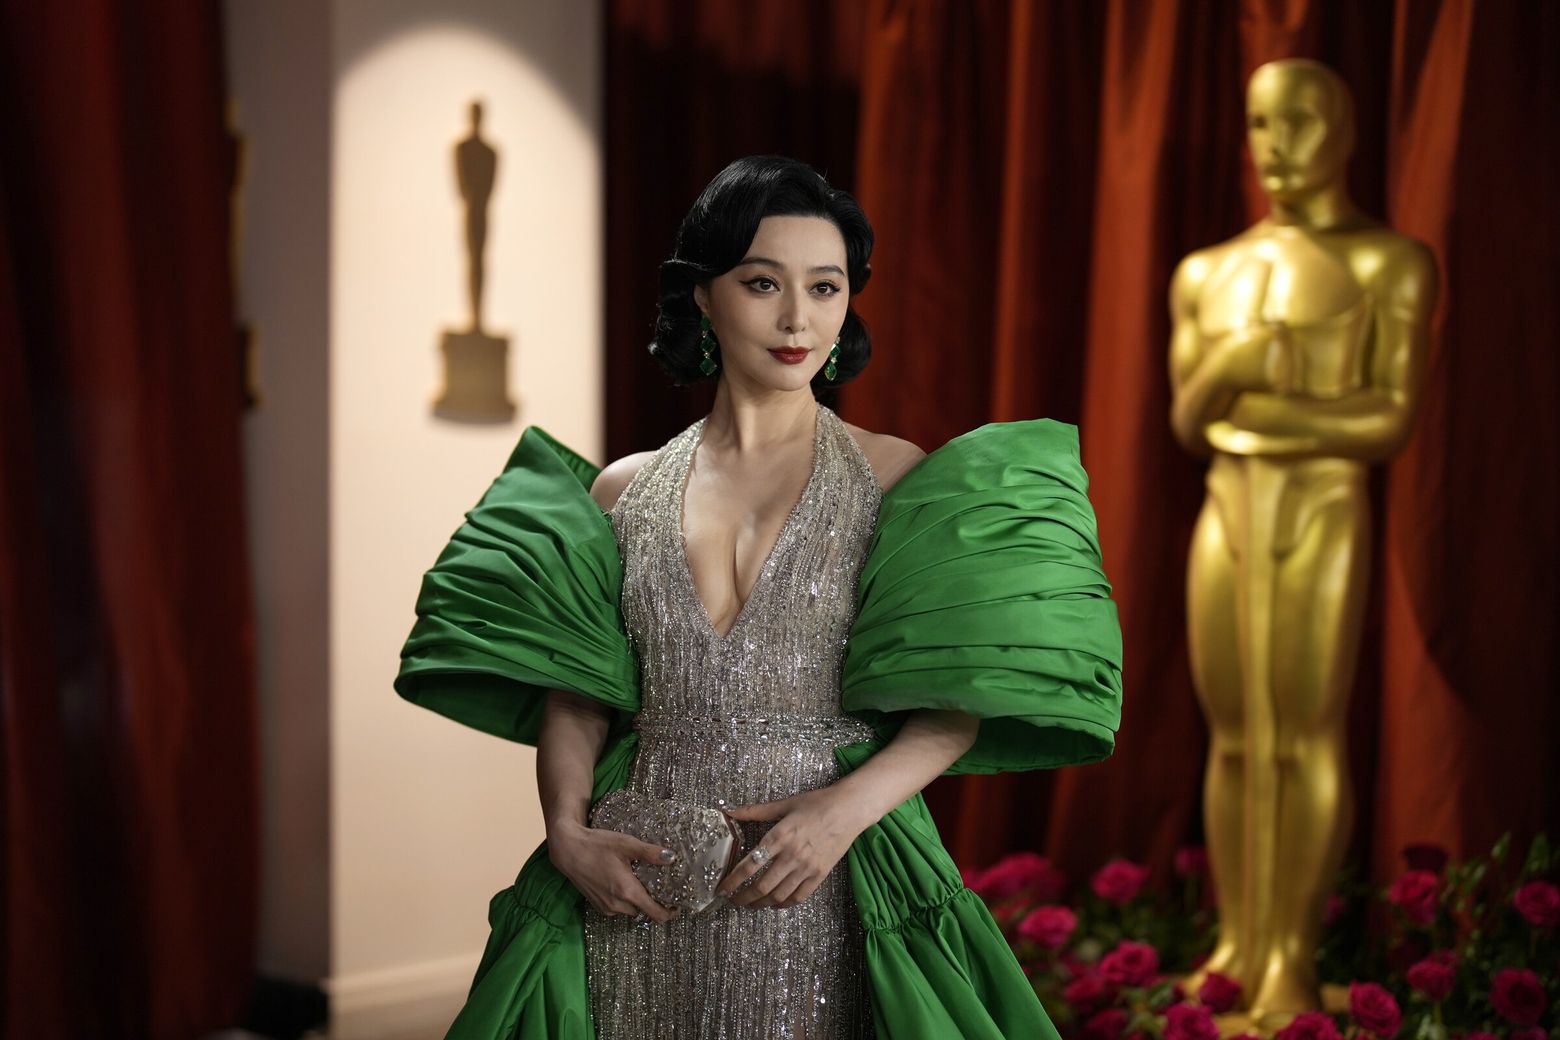 Our critic picks highlights from Oscars 2023's carpet | The Seattle Times